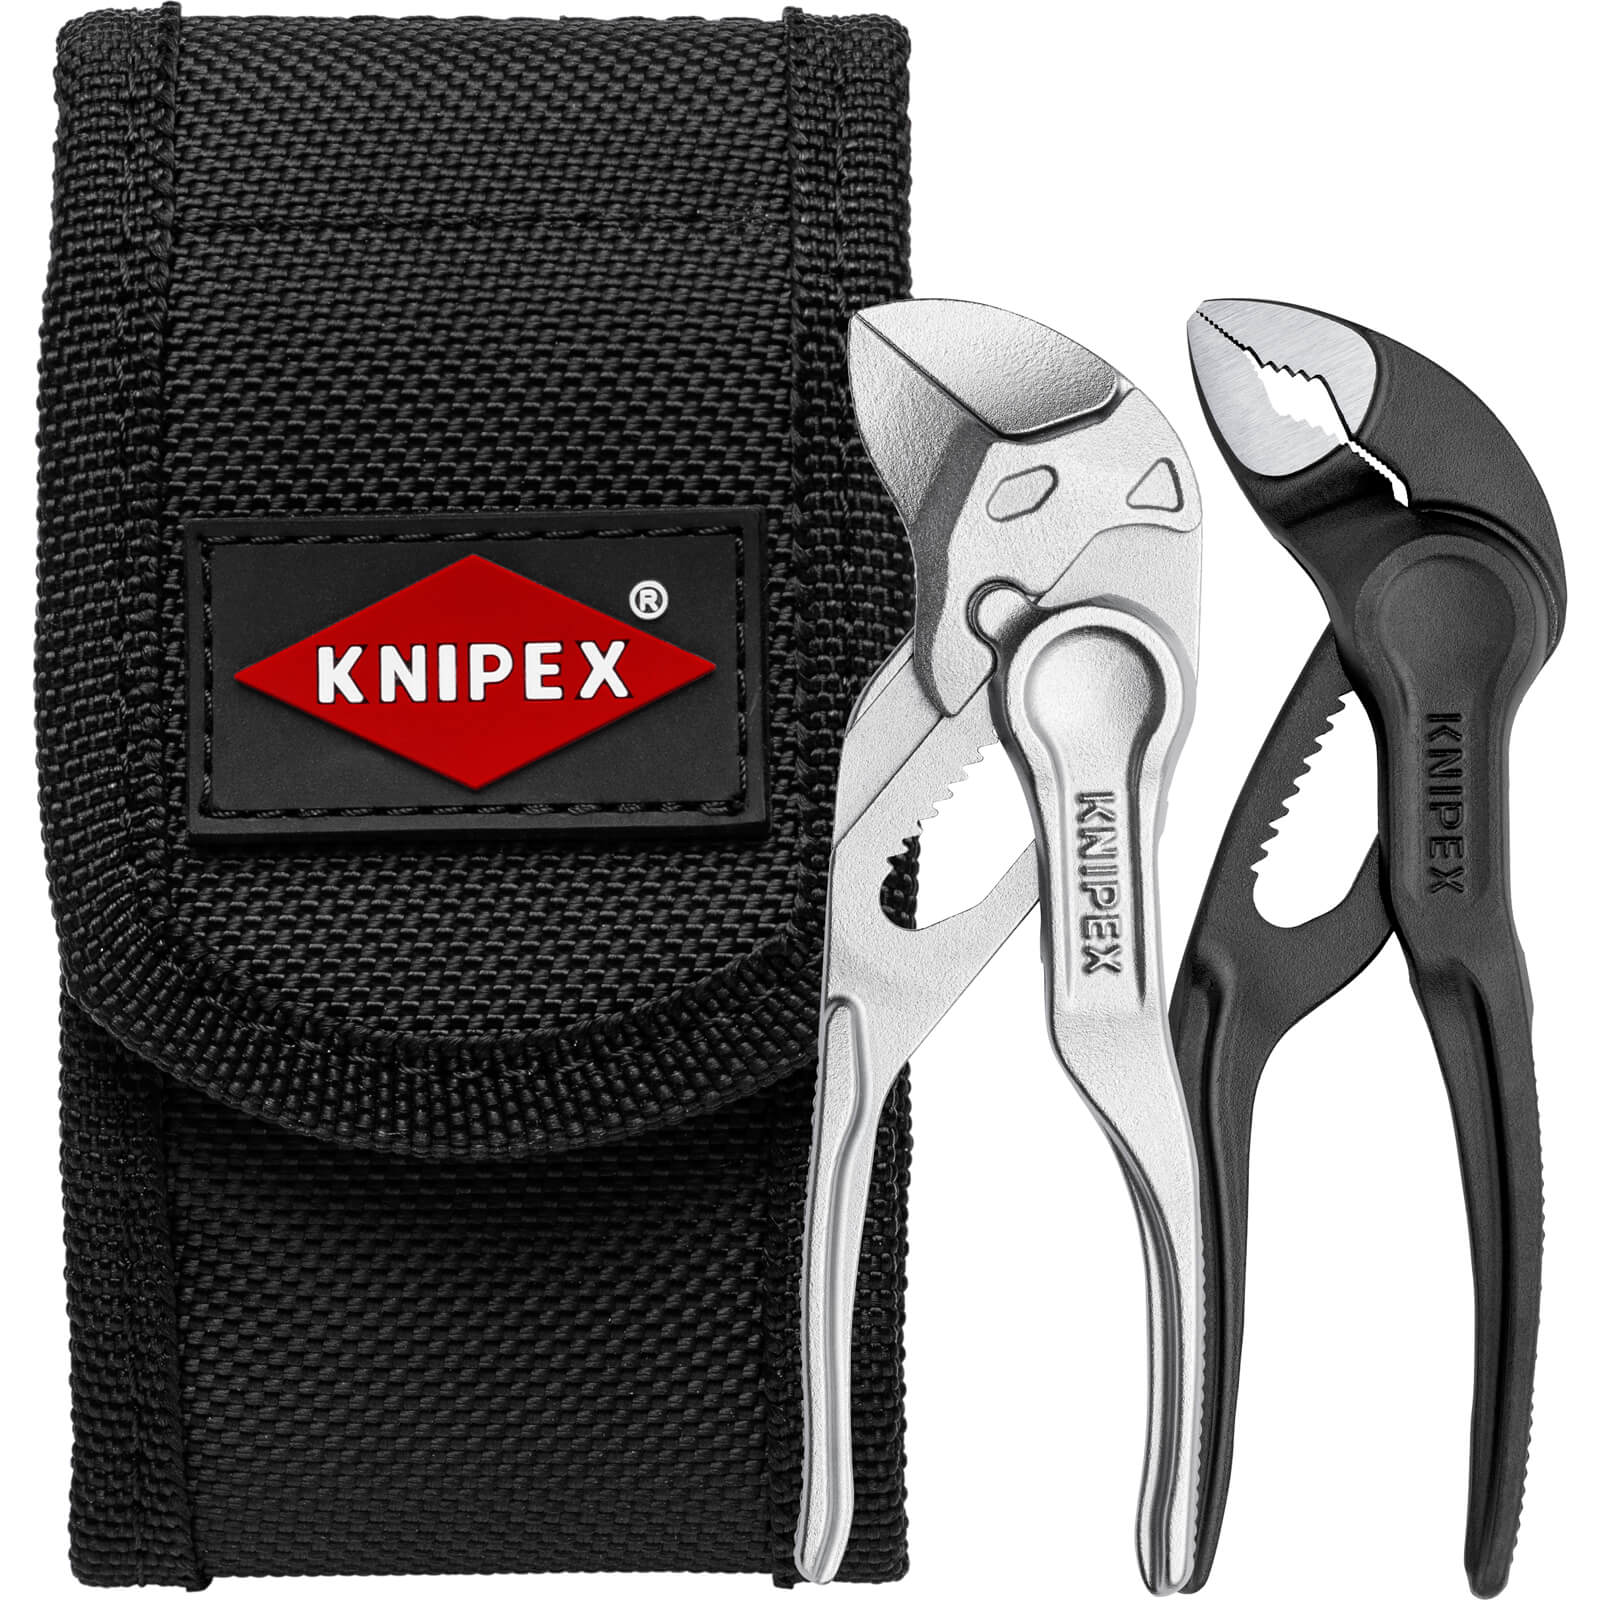 Knipex 2 Piece XS Pliers Belt Tool Pouch Set